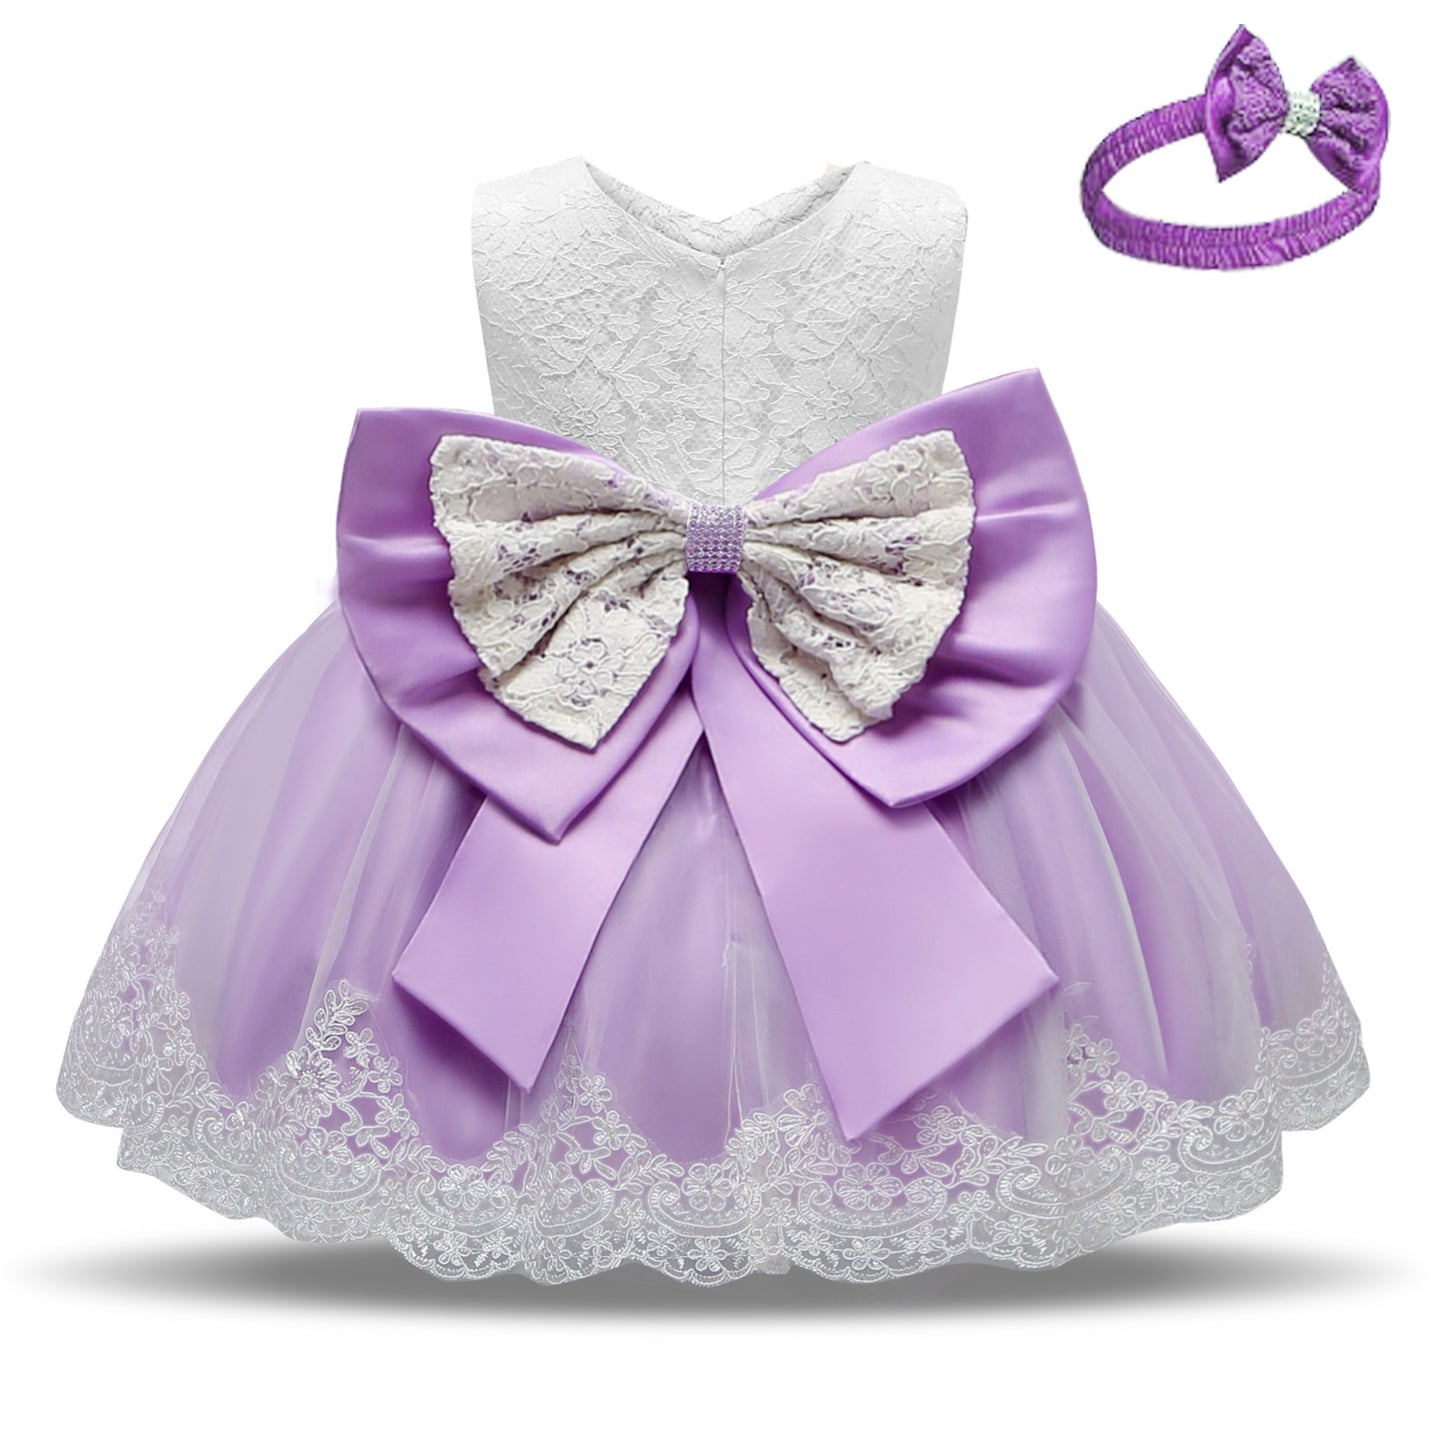 Baby One Year Old Dress Bow Tutu Skirt Baby Toddler Lace Dress